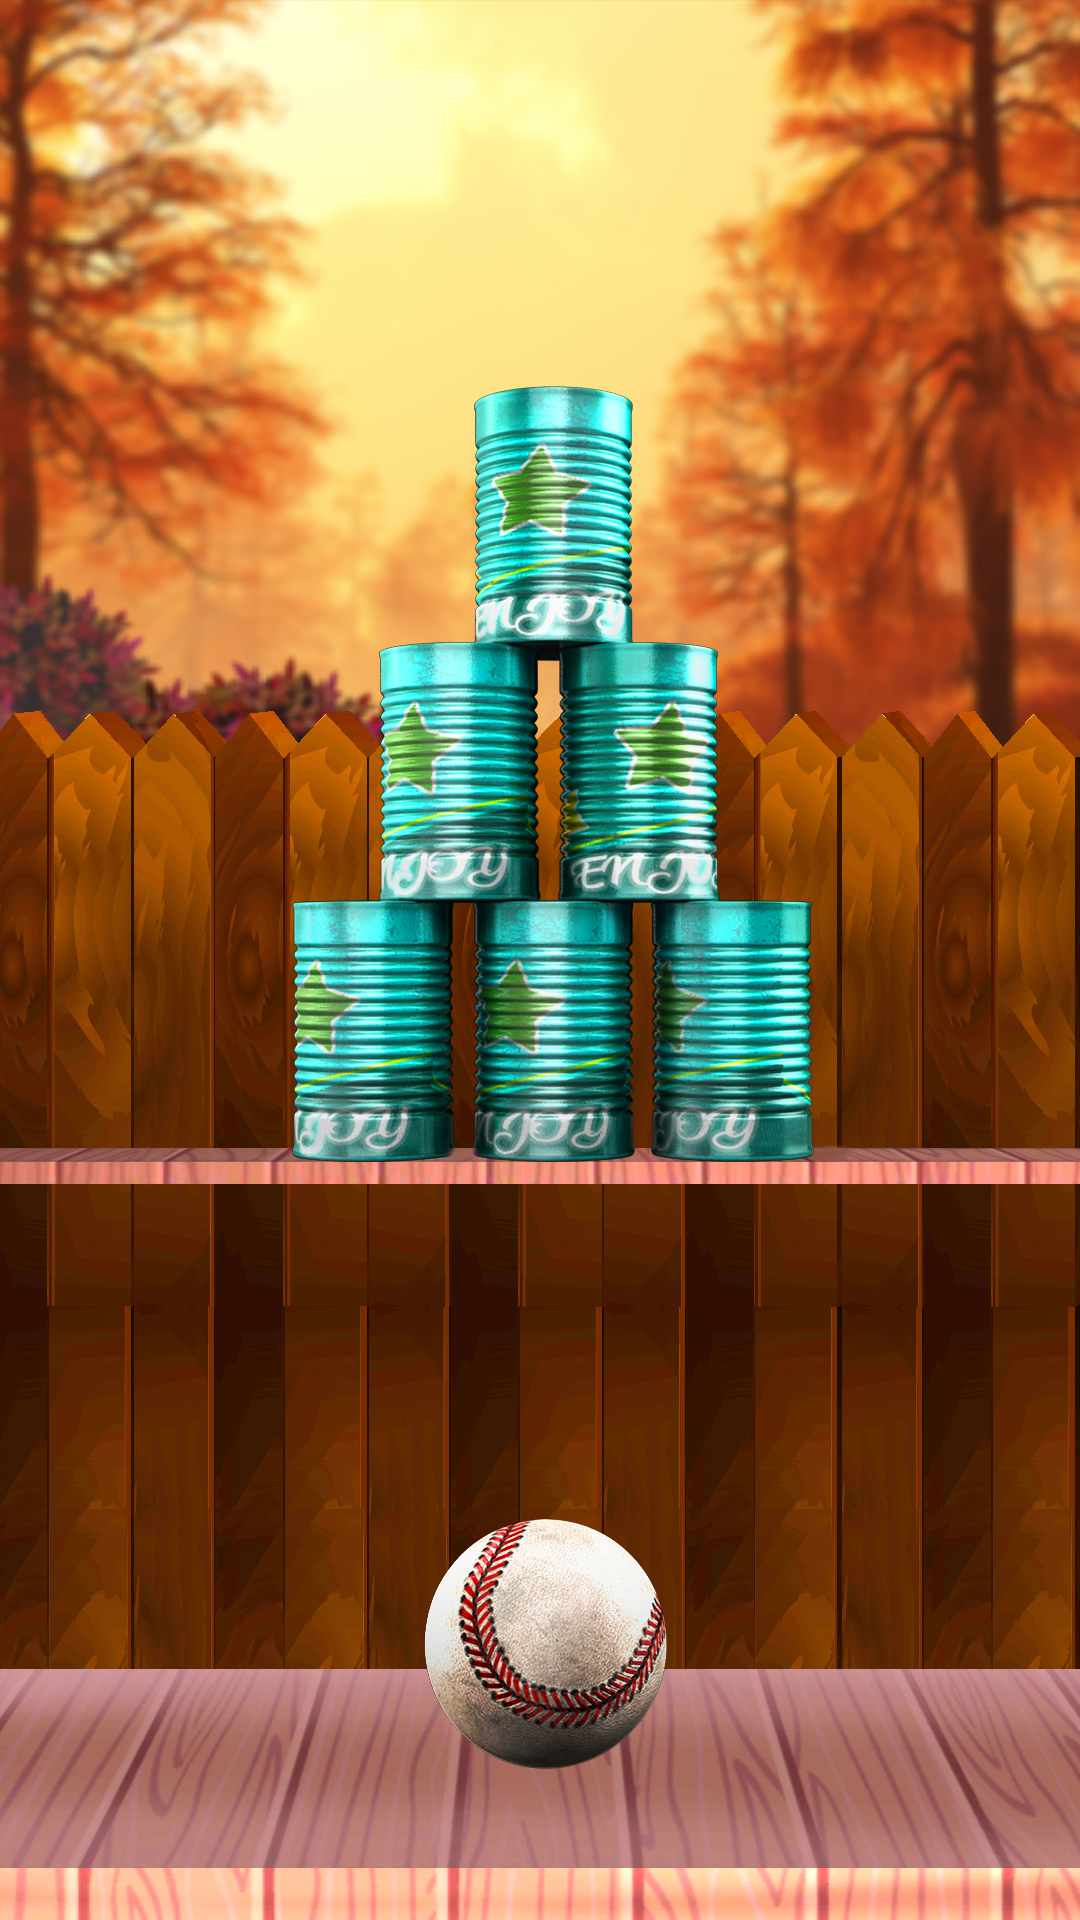 Screenshot 1 of Knock Down It: Golpea si puedes 2.7